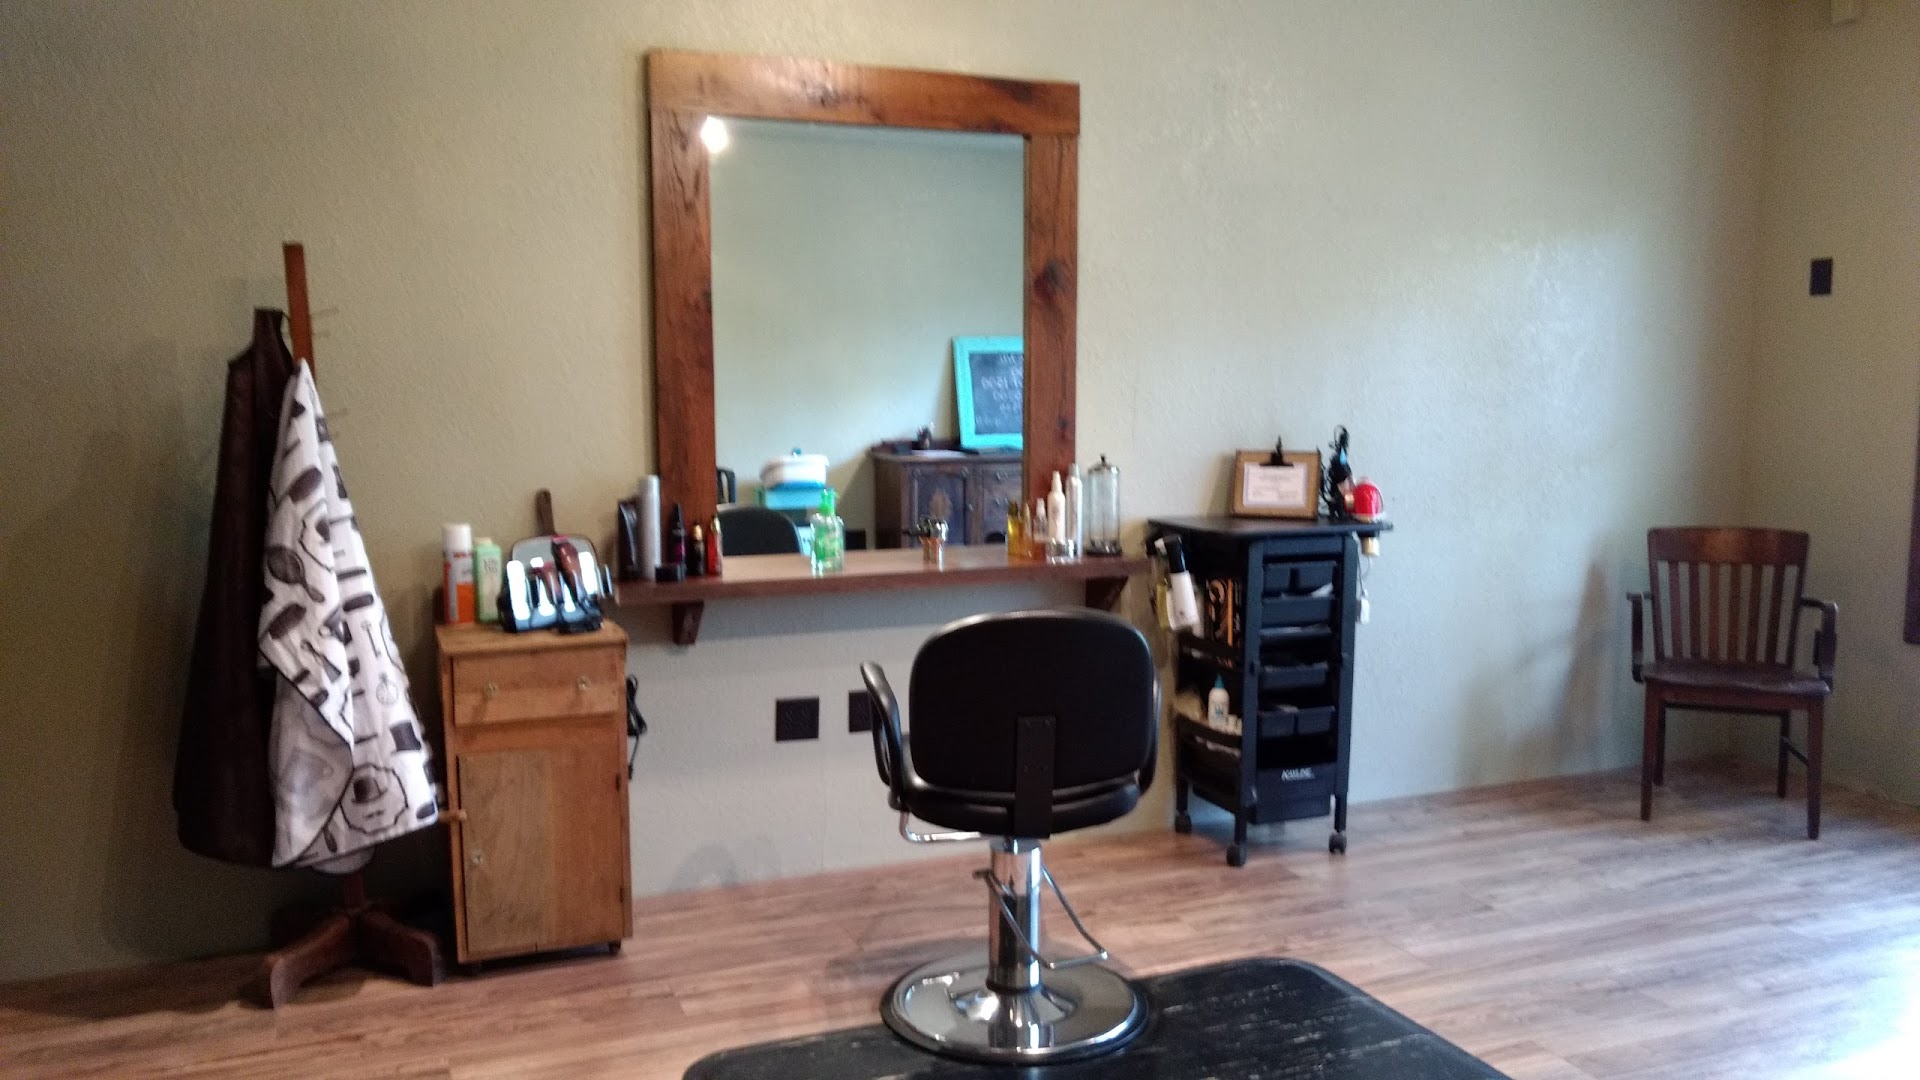 Countryside Salon not taking new clients